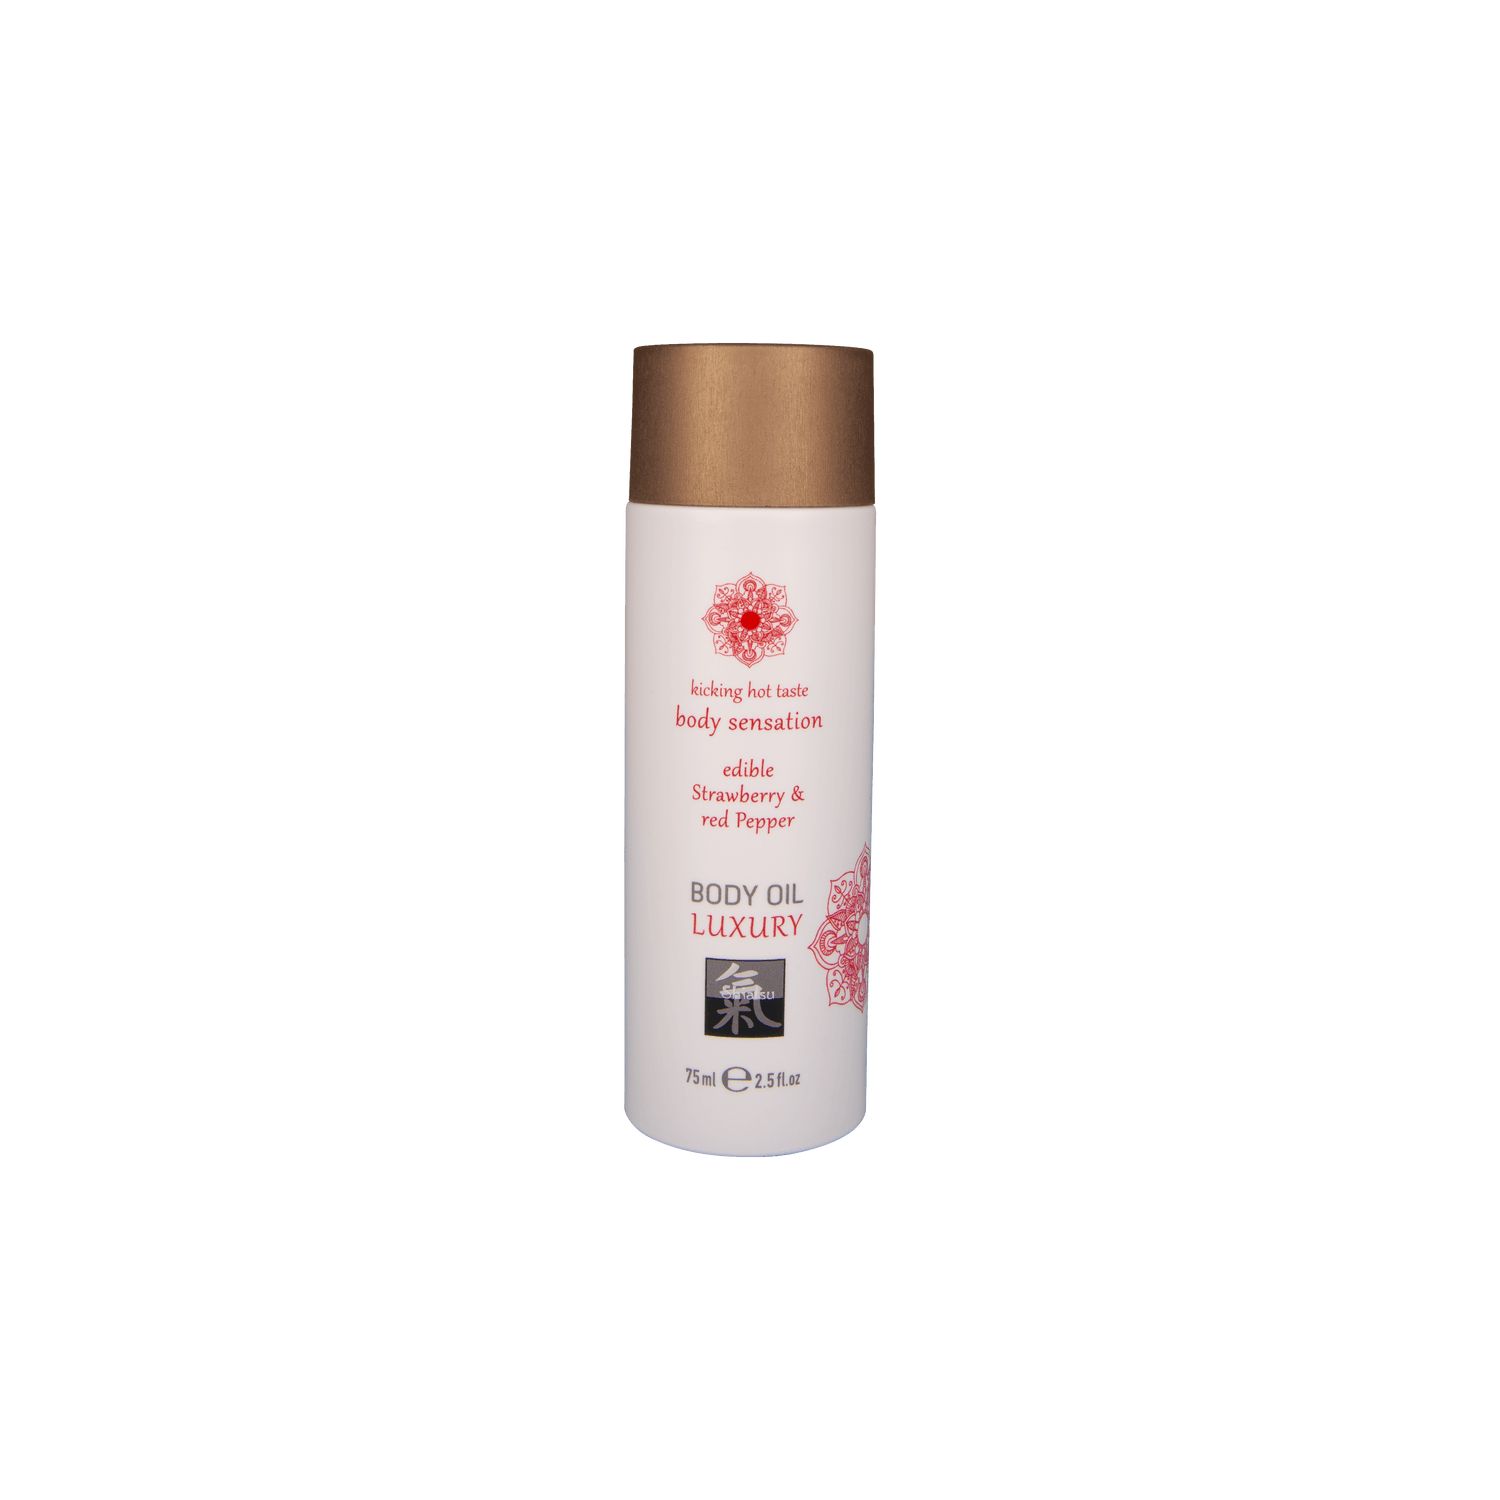 Luxury Body oil edible - Strawberry & Red Pepper